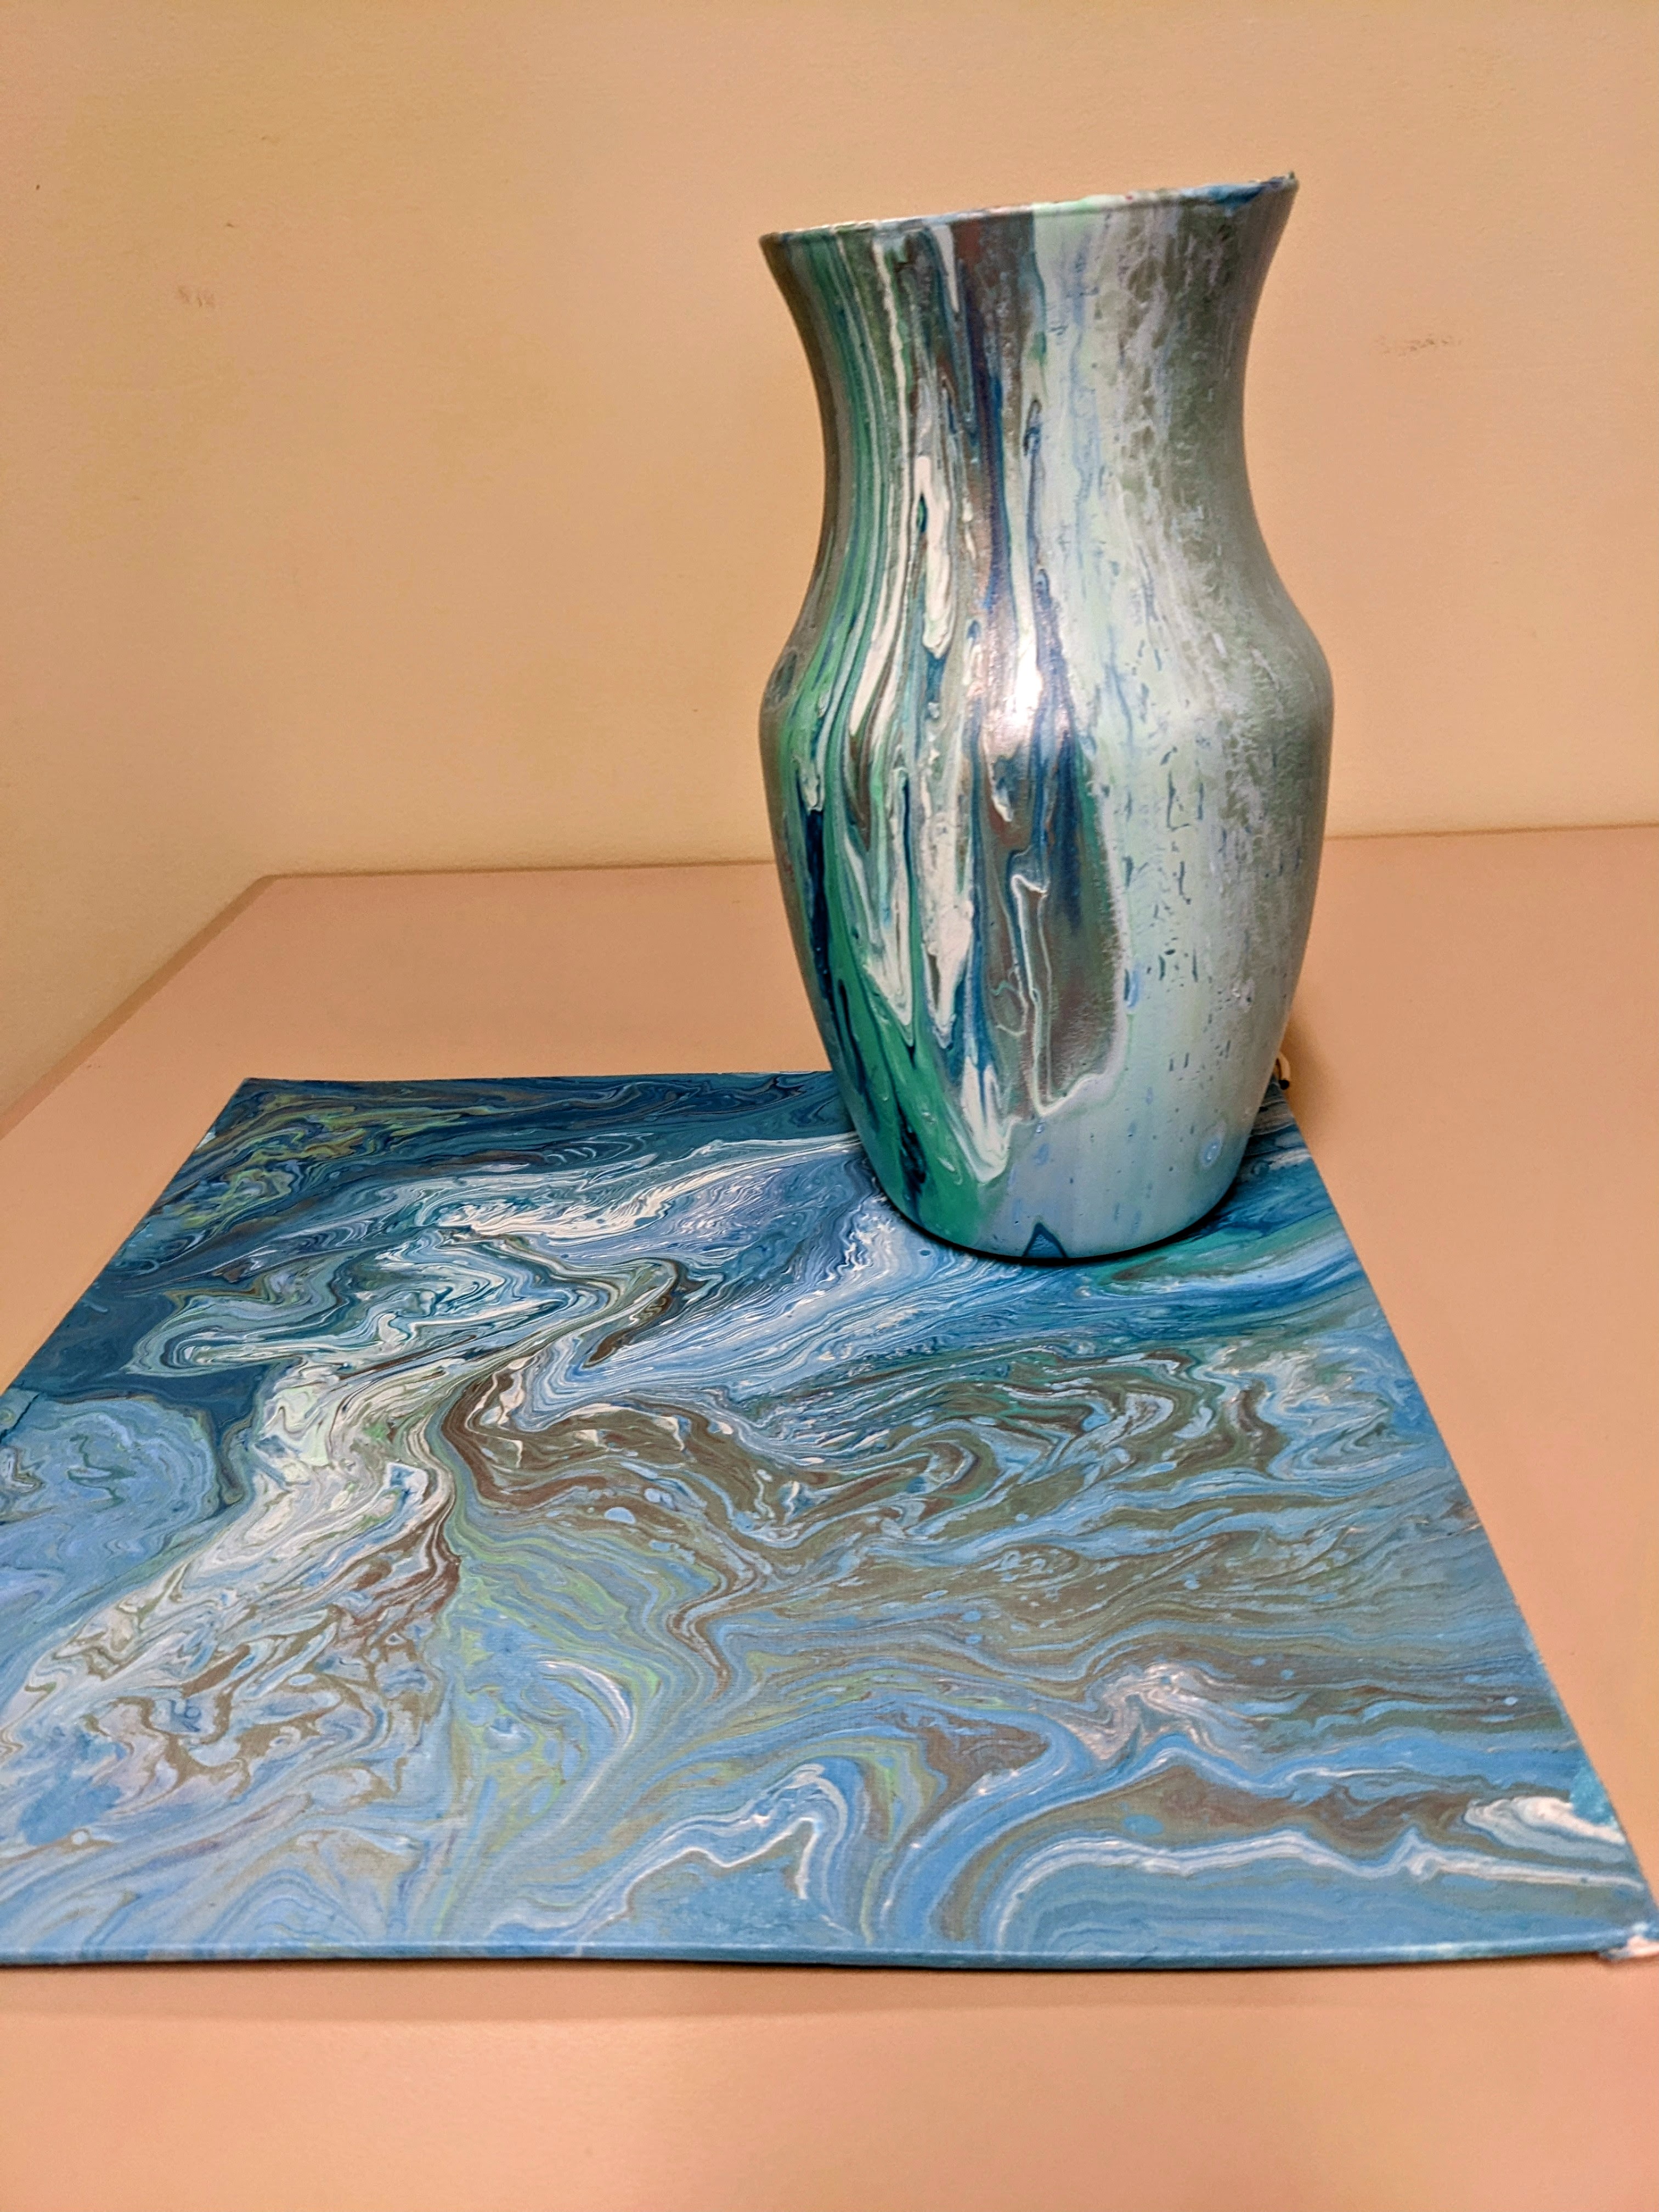 Glass vase and canvas with blue, aqua, silver, and white paint poured over them.